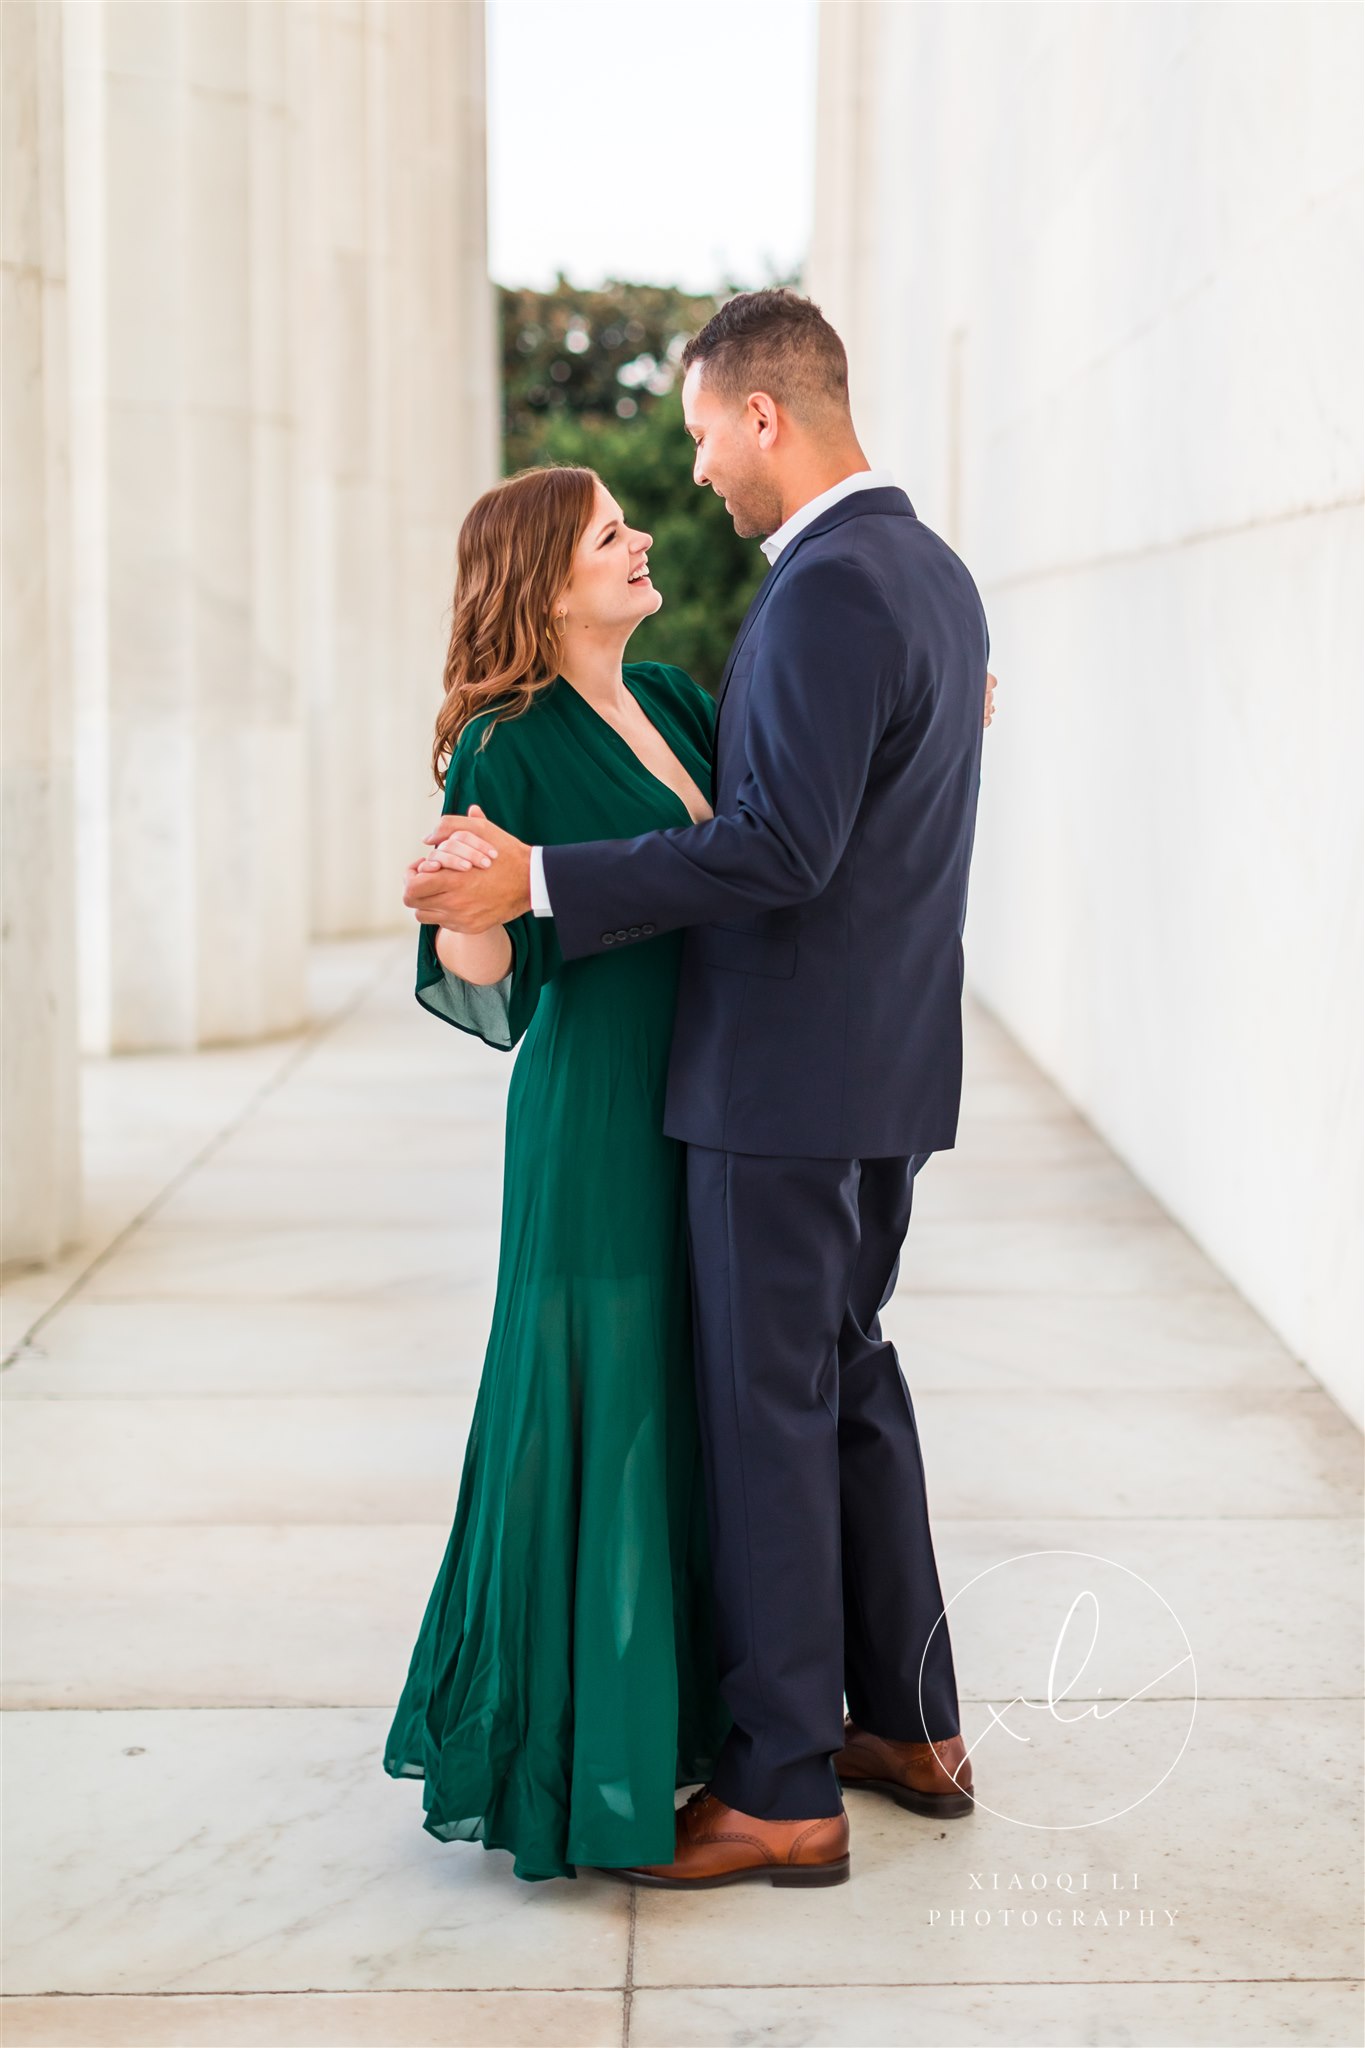 man and woman dancing at Lincoln Memorial in formal attire, woman wearing emerald dress and man wearing suit